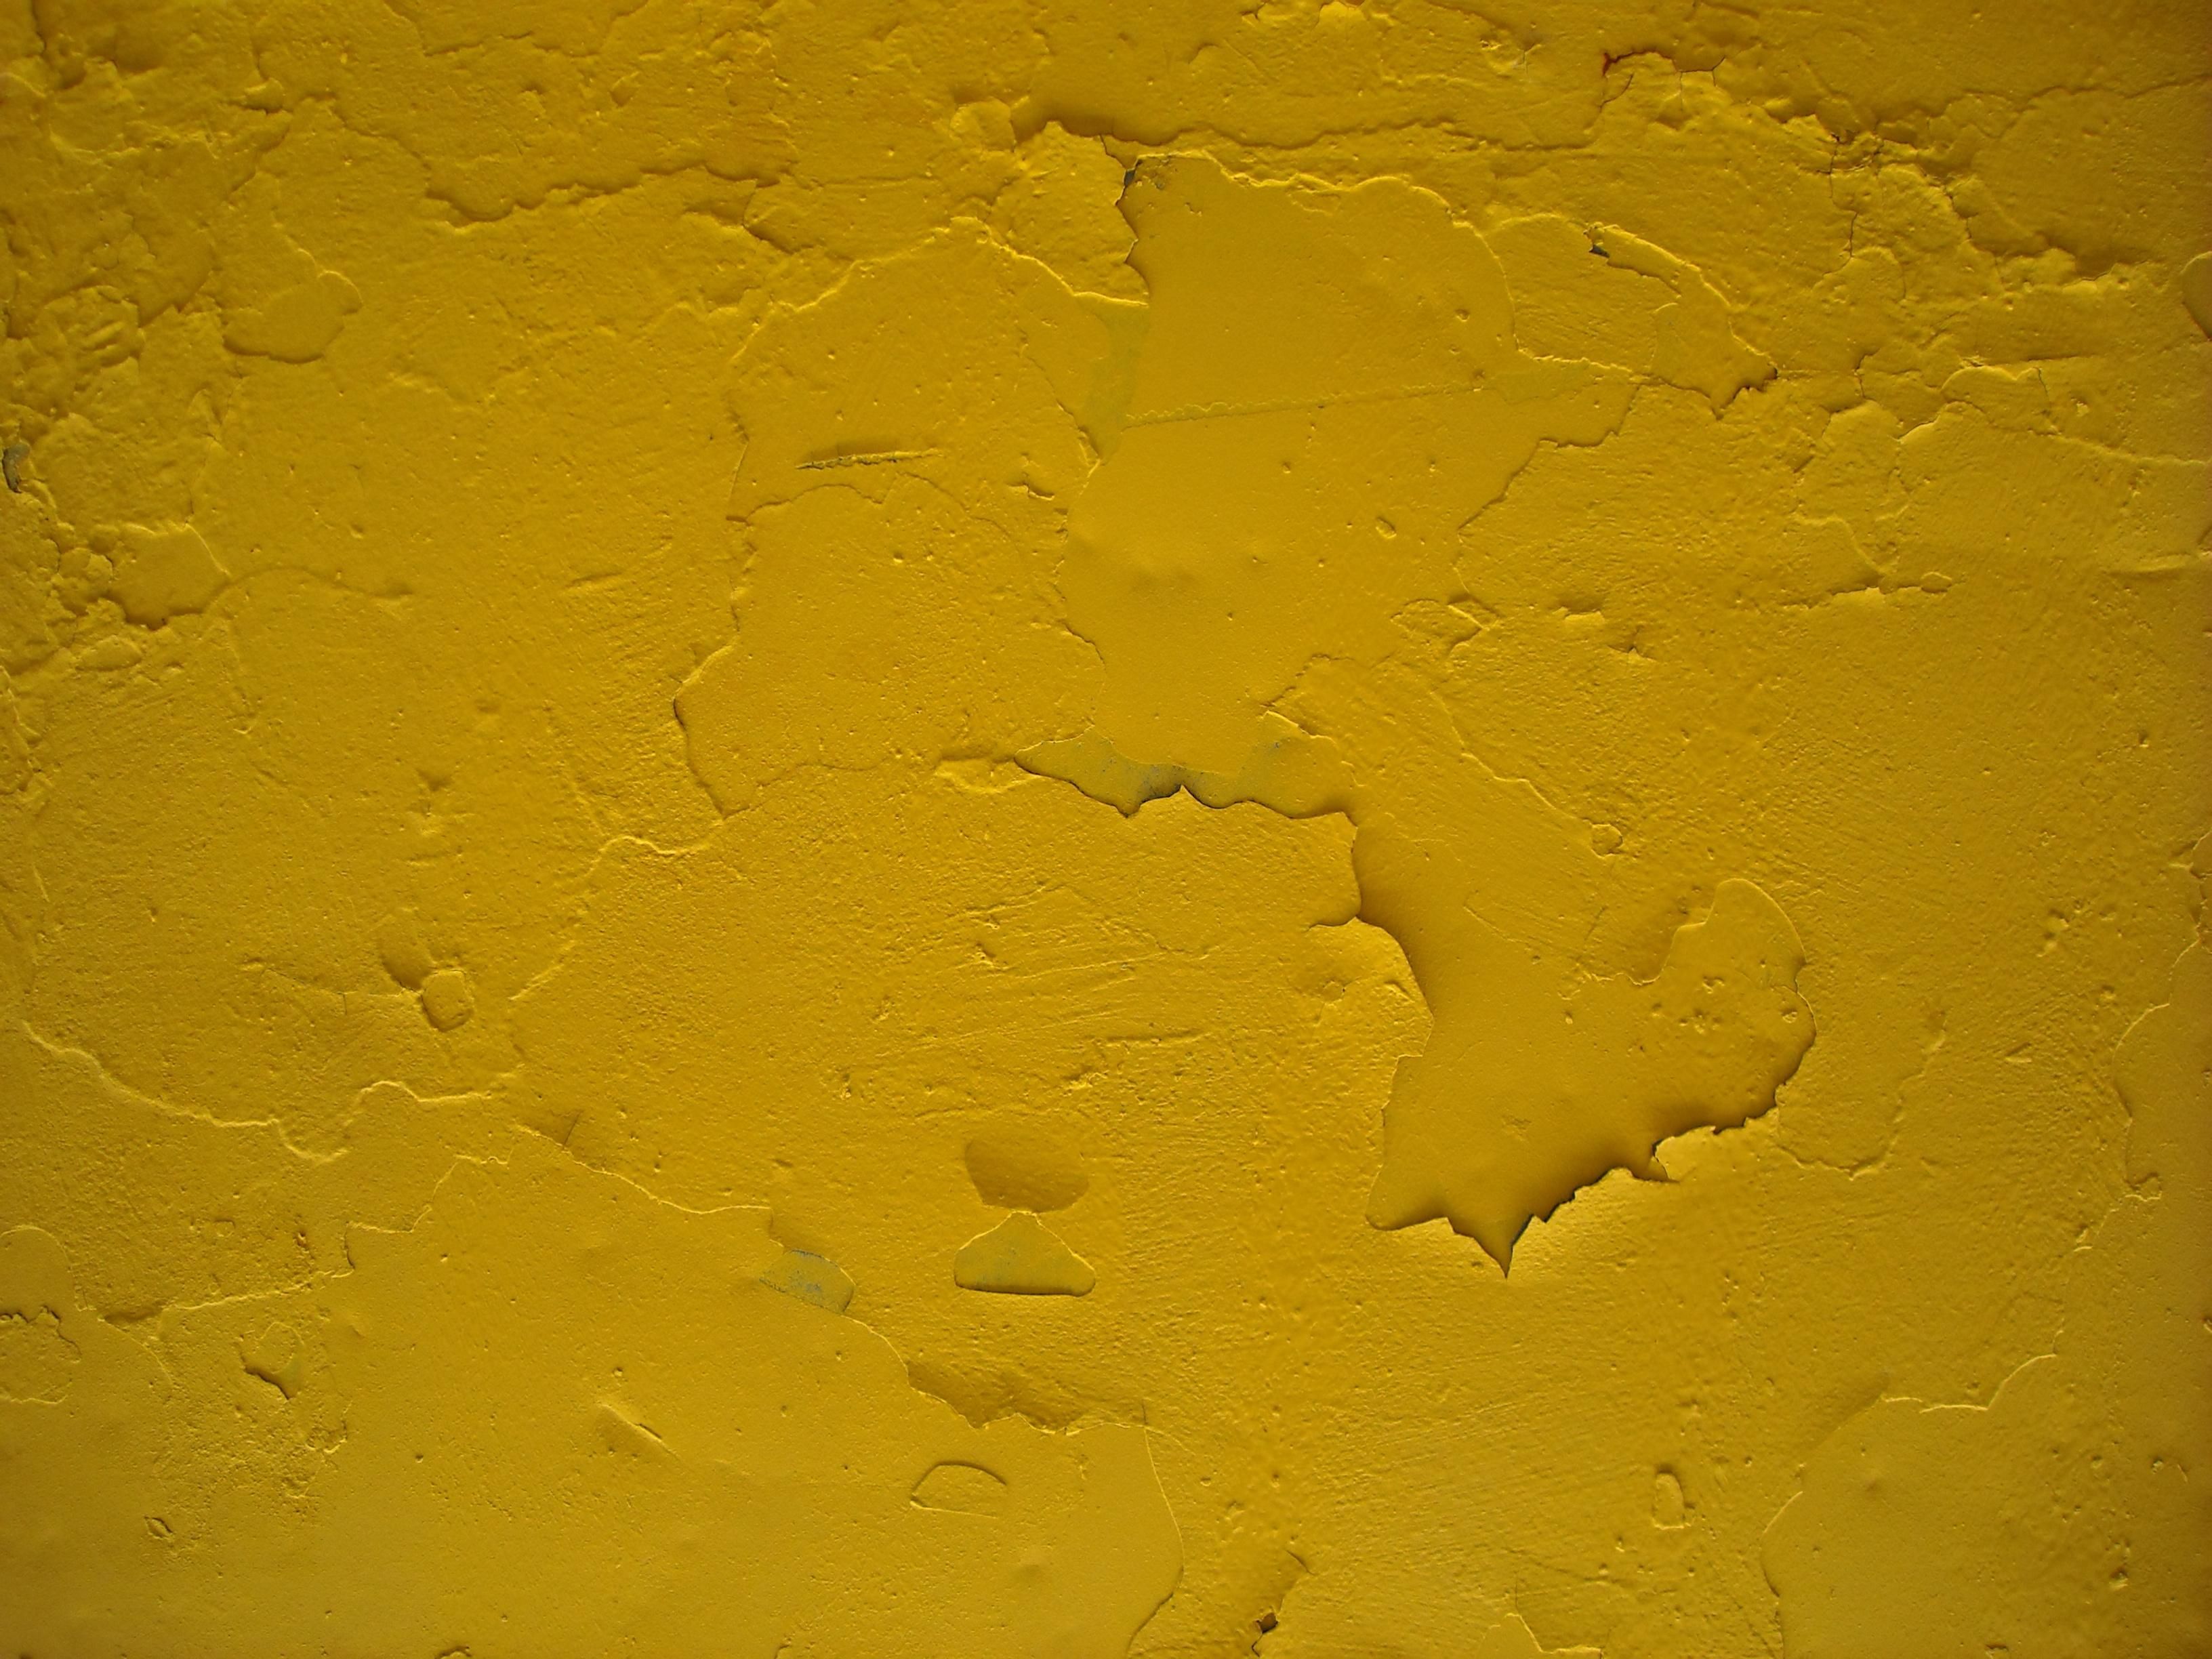 File:Painted wall.jpg - Wikimedia Commons